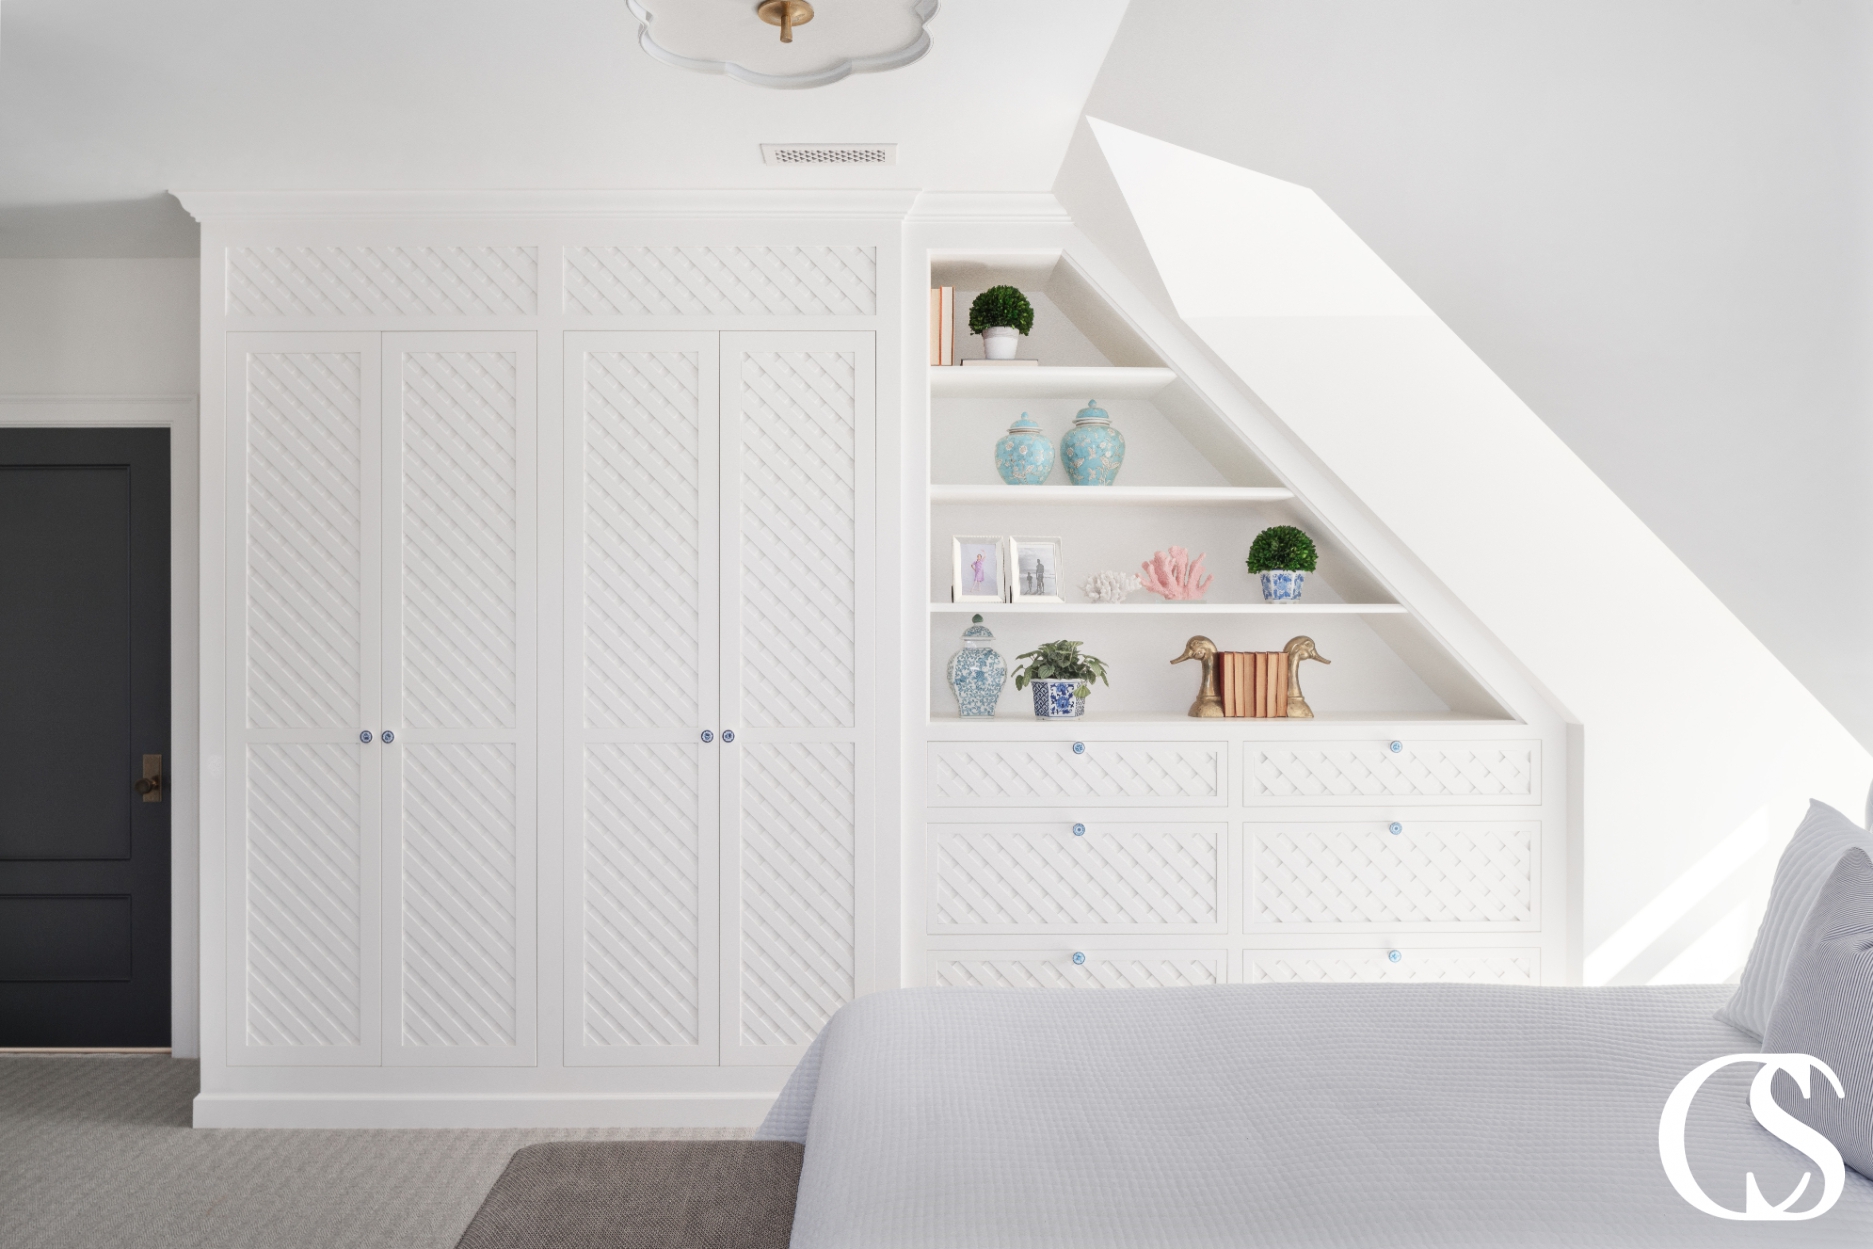 Beautiful custom built-in white cabinets designed with a classic, timeless aesthetic featuring elegant crown molding and ample storage space, perfect for a bedroom.